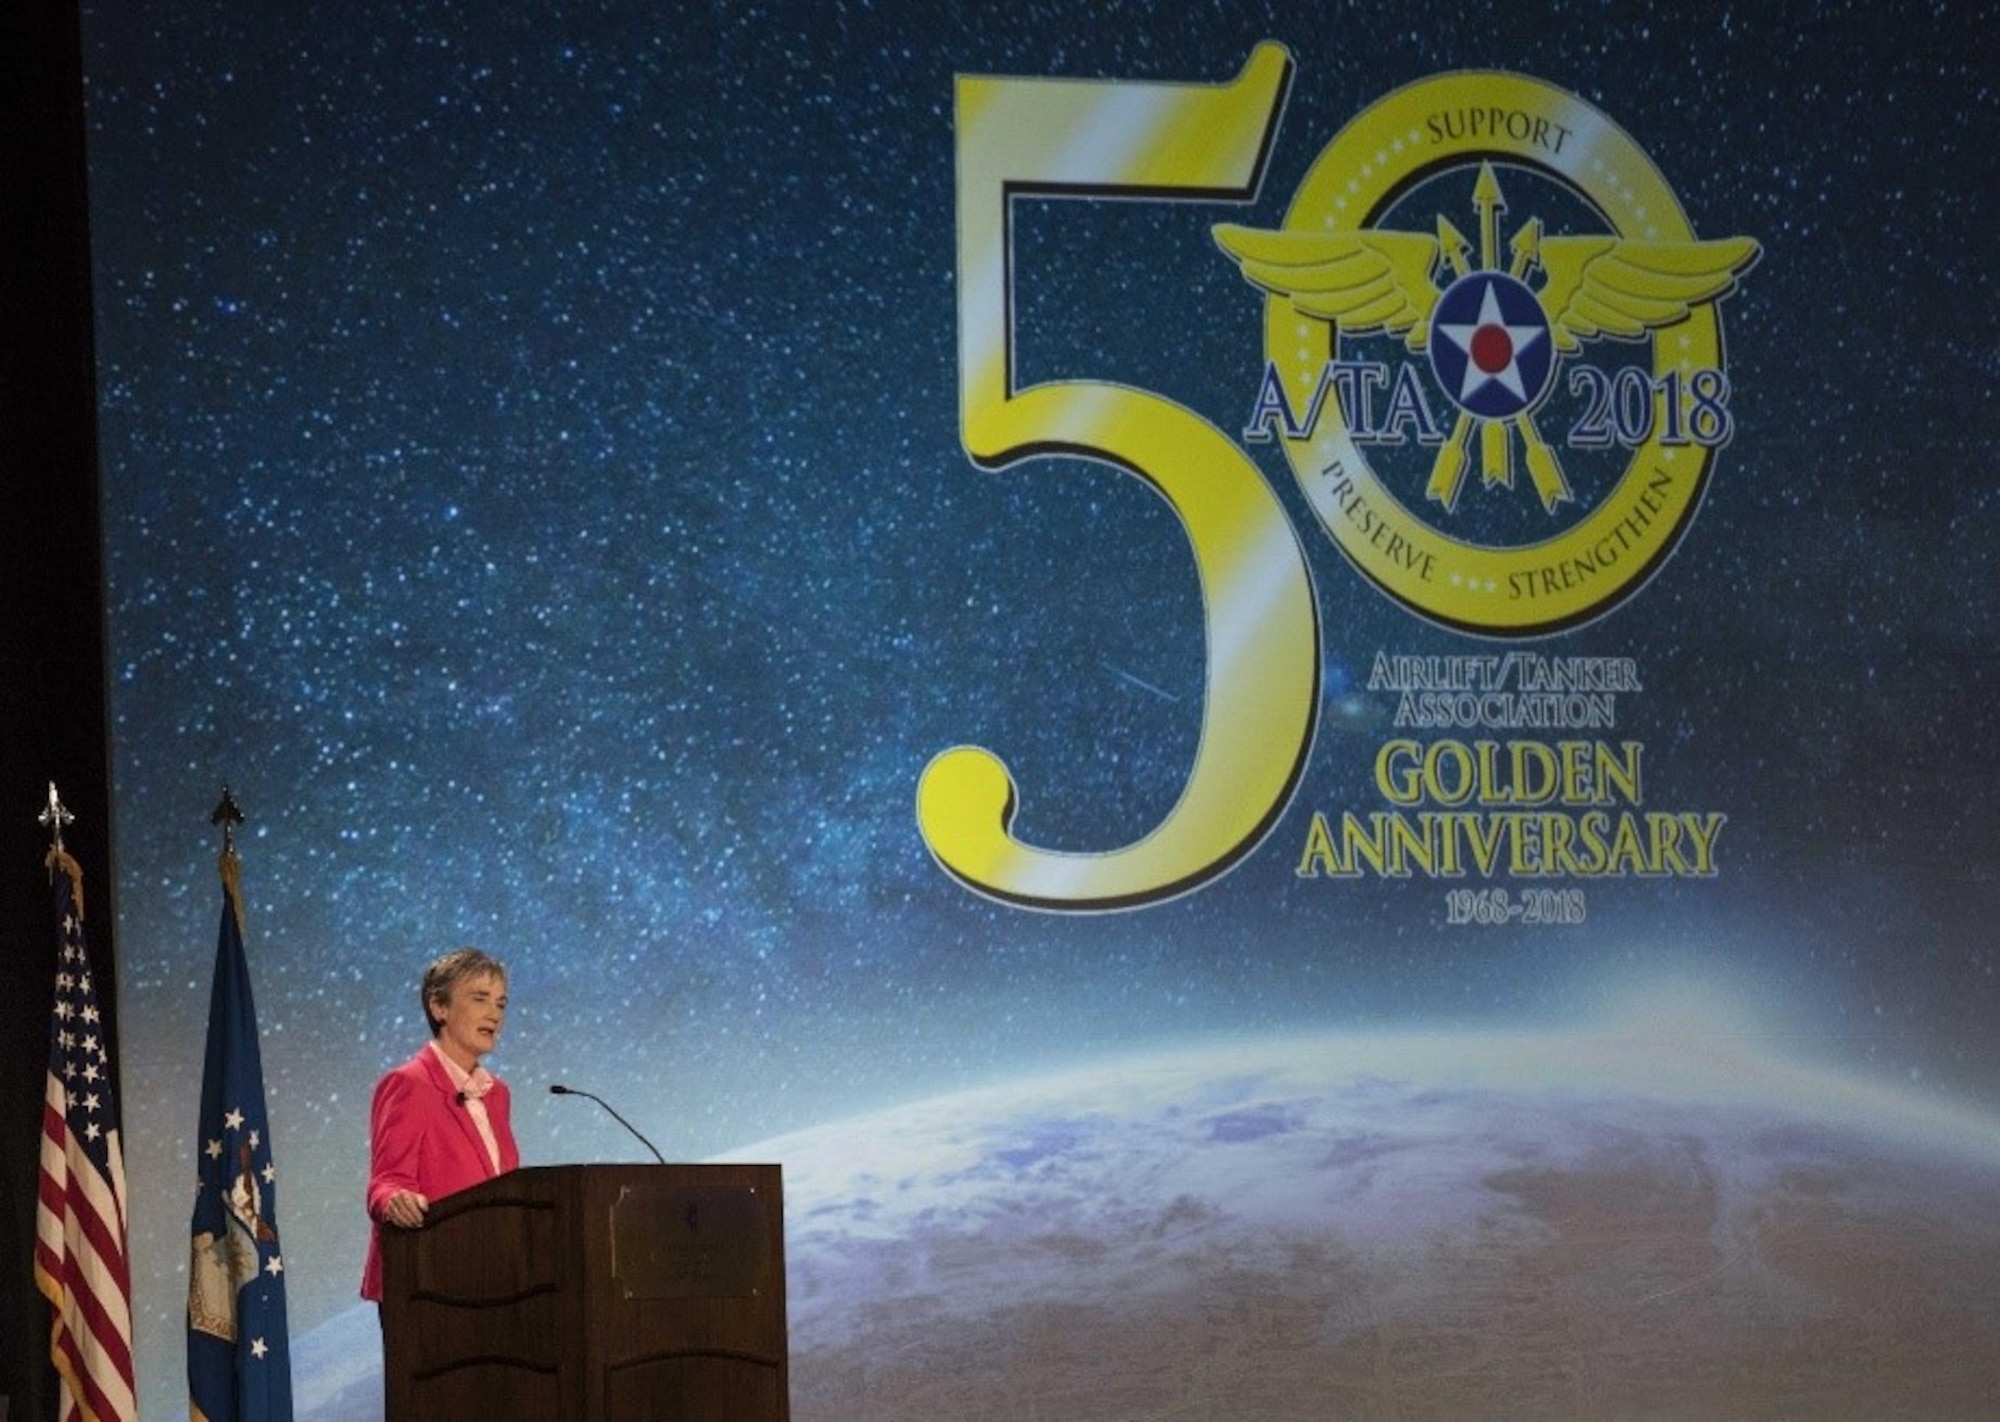 Secretary of the Air Force Heather Wilson, gives the first major address of the Airlift/Tanker Association Symposium in Grapevine, Texas, Oct. 25, 2018. Wilson spoke about the Air Force's status in restoring readiness in the force and outlined plans to grow squadrons, develop leaders, and cost-effectively modernize to succeed in the current age of great power competition. A/TA provides mobility Airmen a professional development forum to engage with industry experts within the mobility enterprise, attend seminars focused on mobility priorities, and listen to leadership perspectives from top leaders in the Air Force and Department of Defense.     (U.S. Air Force photo by Tech. Sgt. Jodi Martinez)